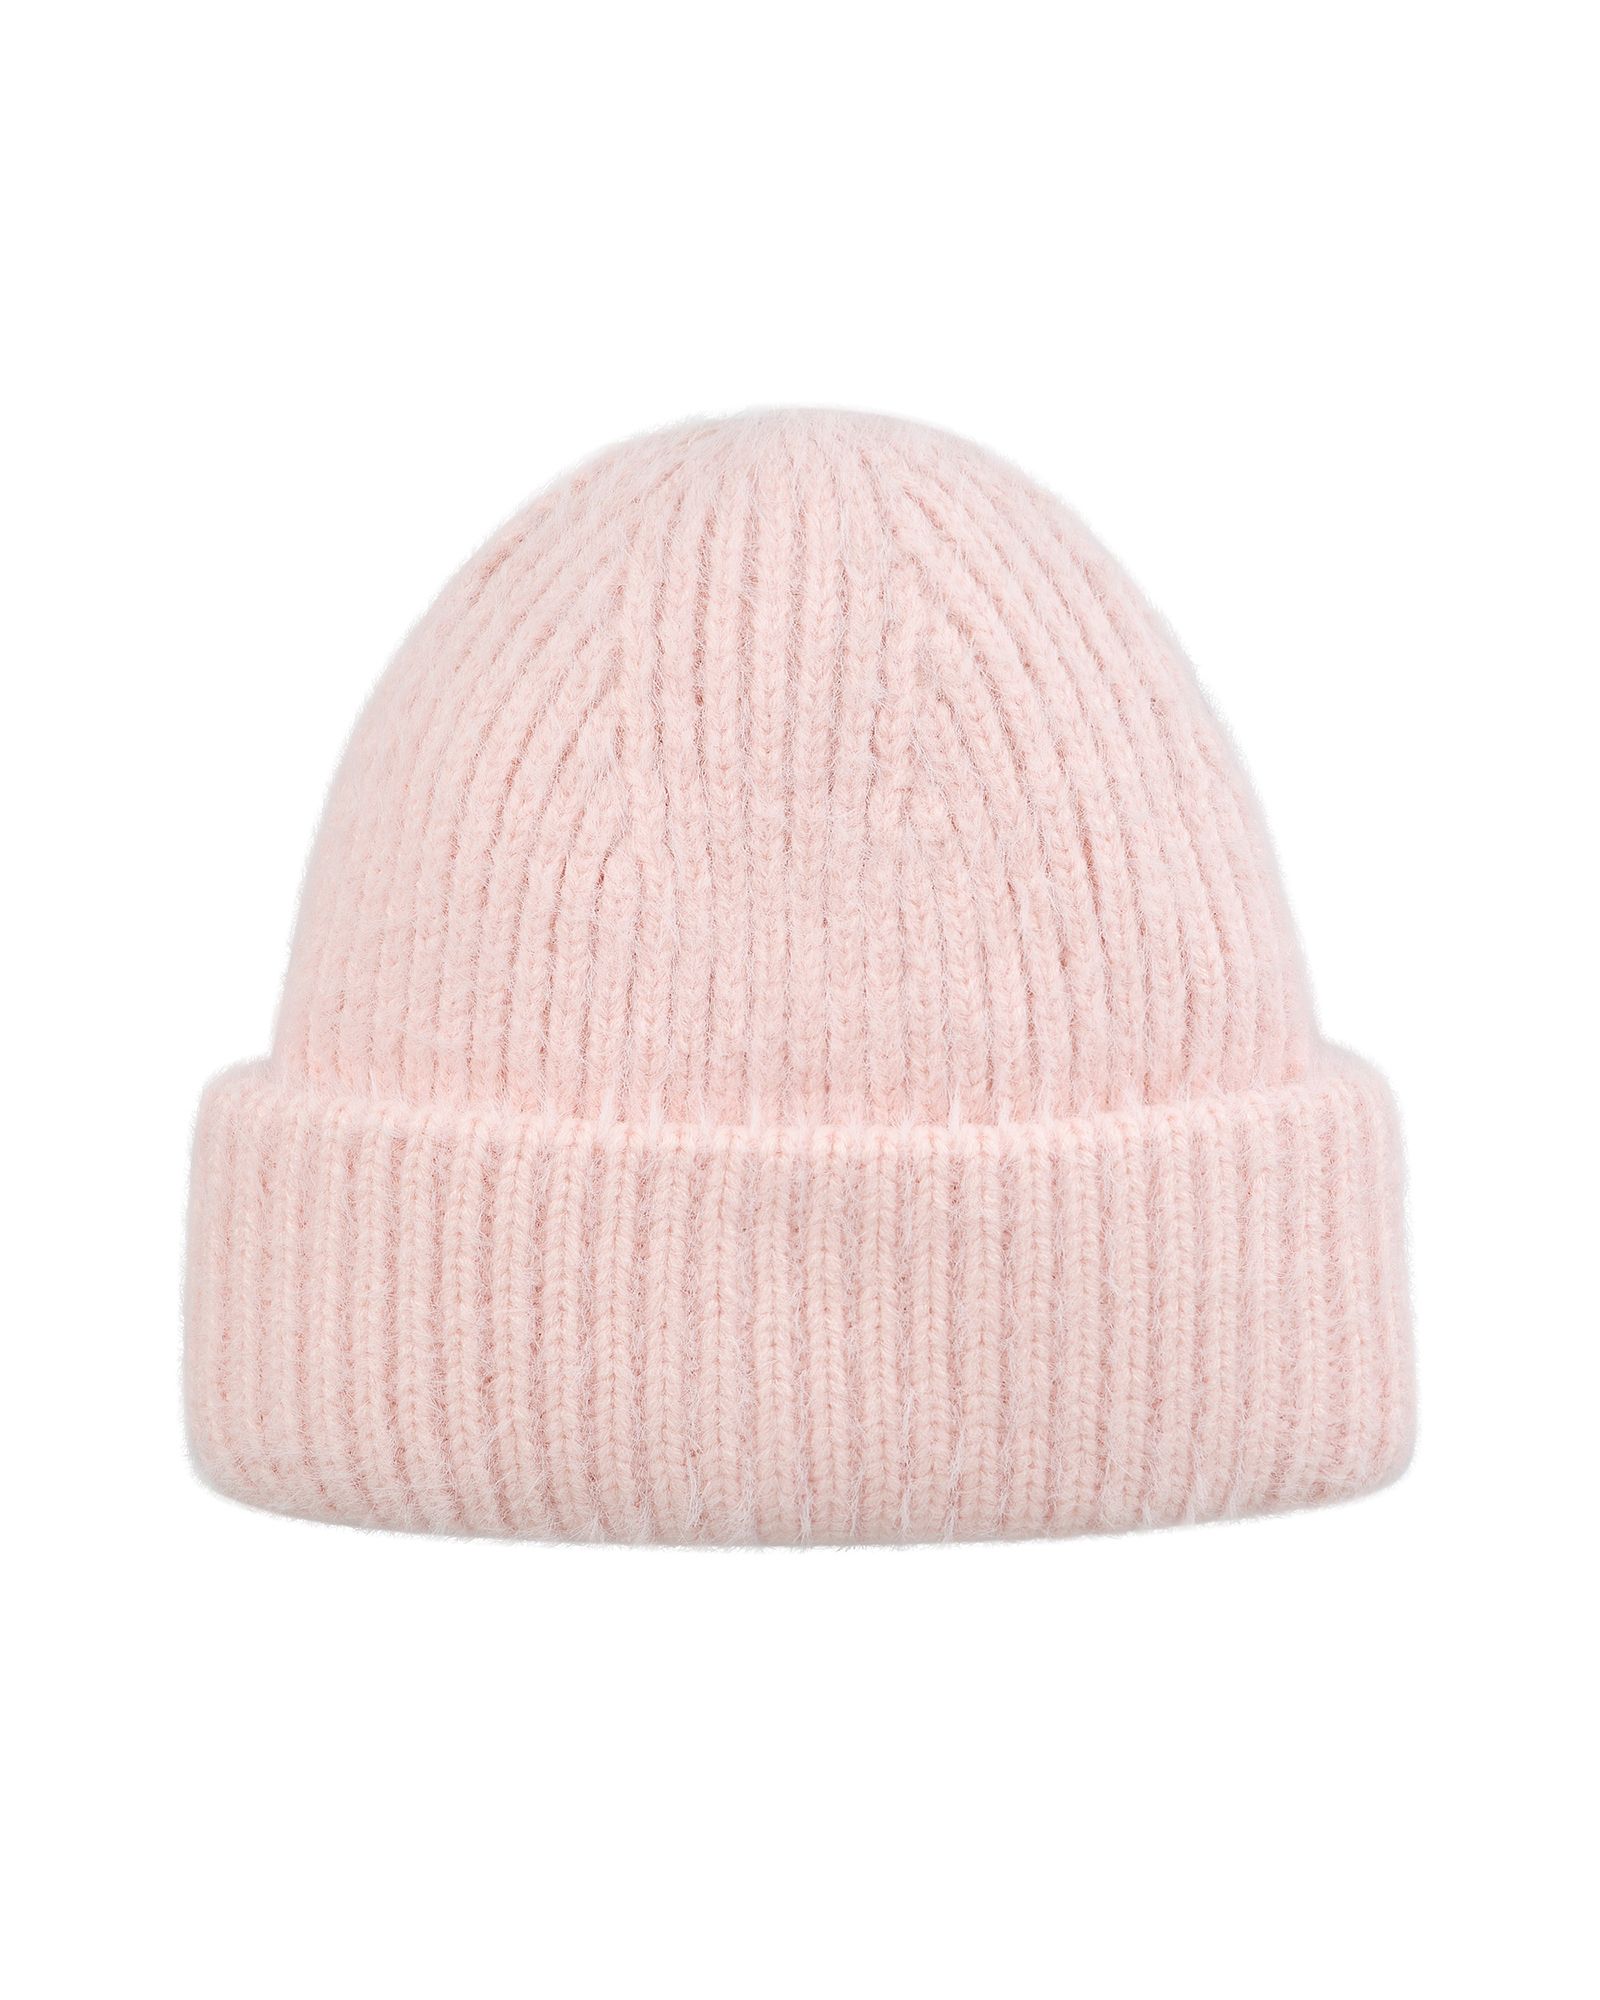 Fluffy Ribbed Knit Pink Beanie Hat | Oliver Bonas